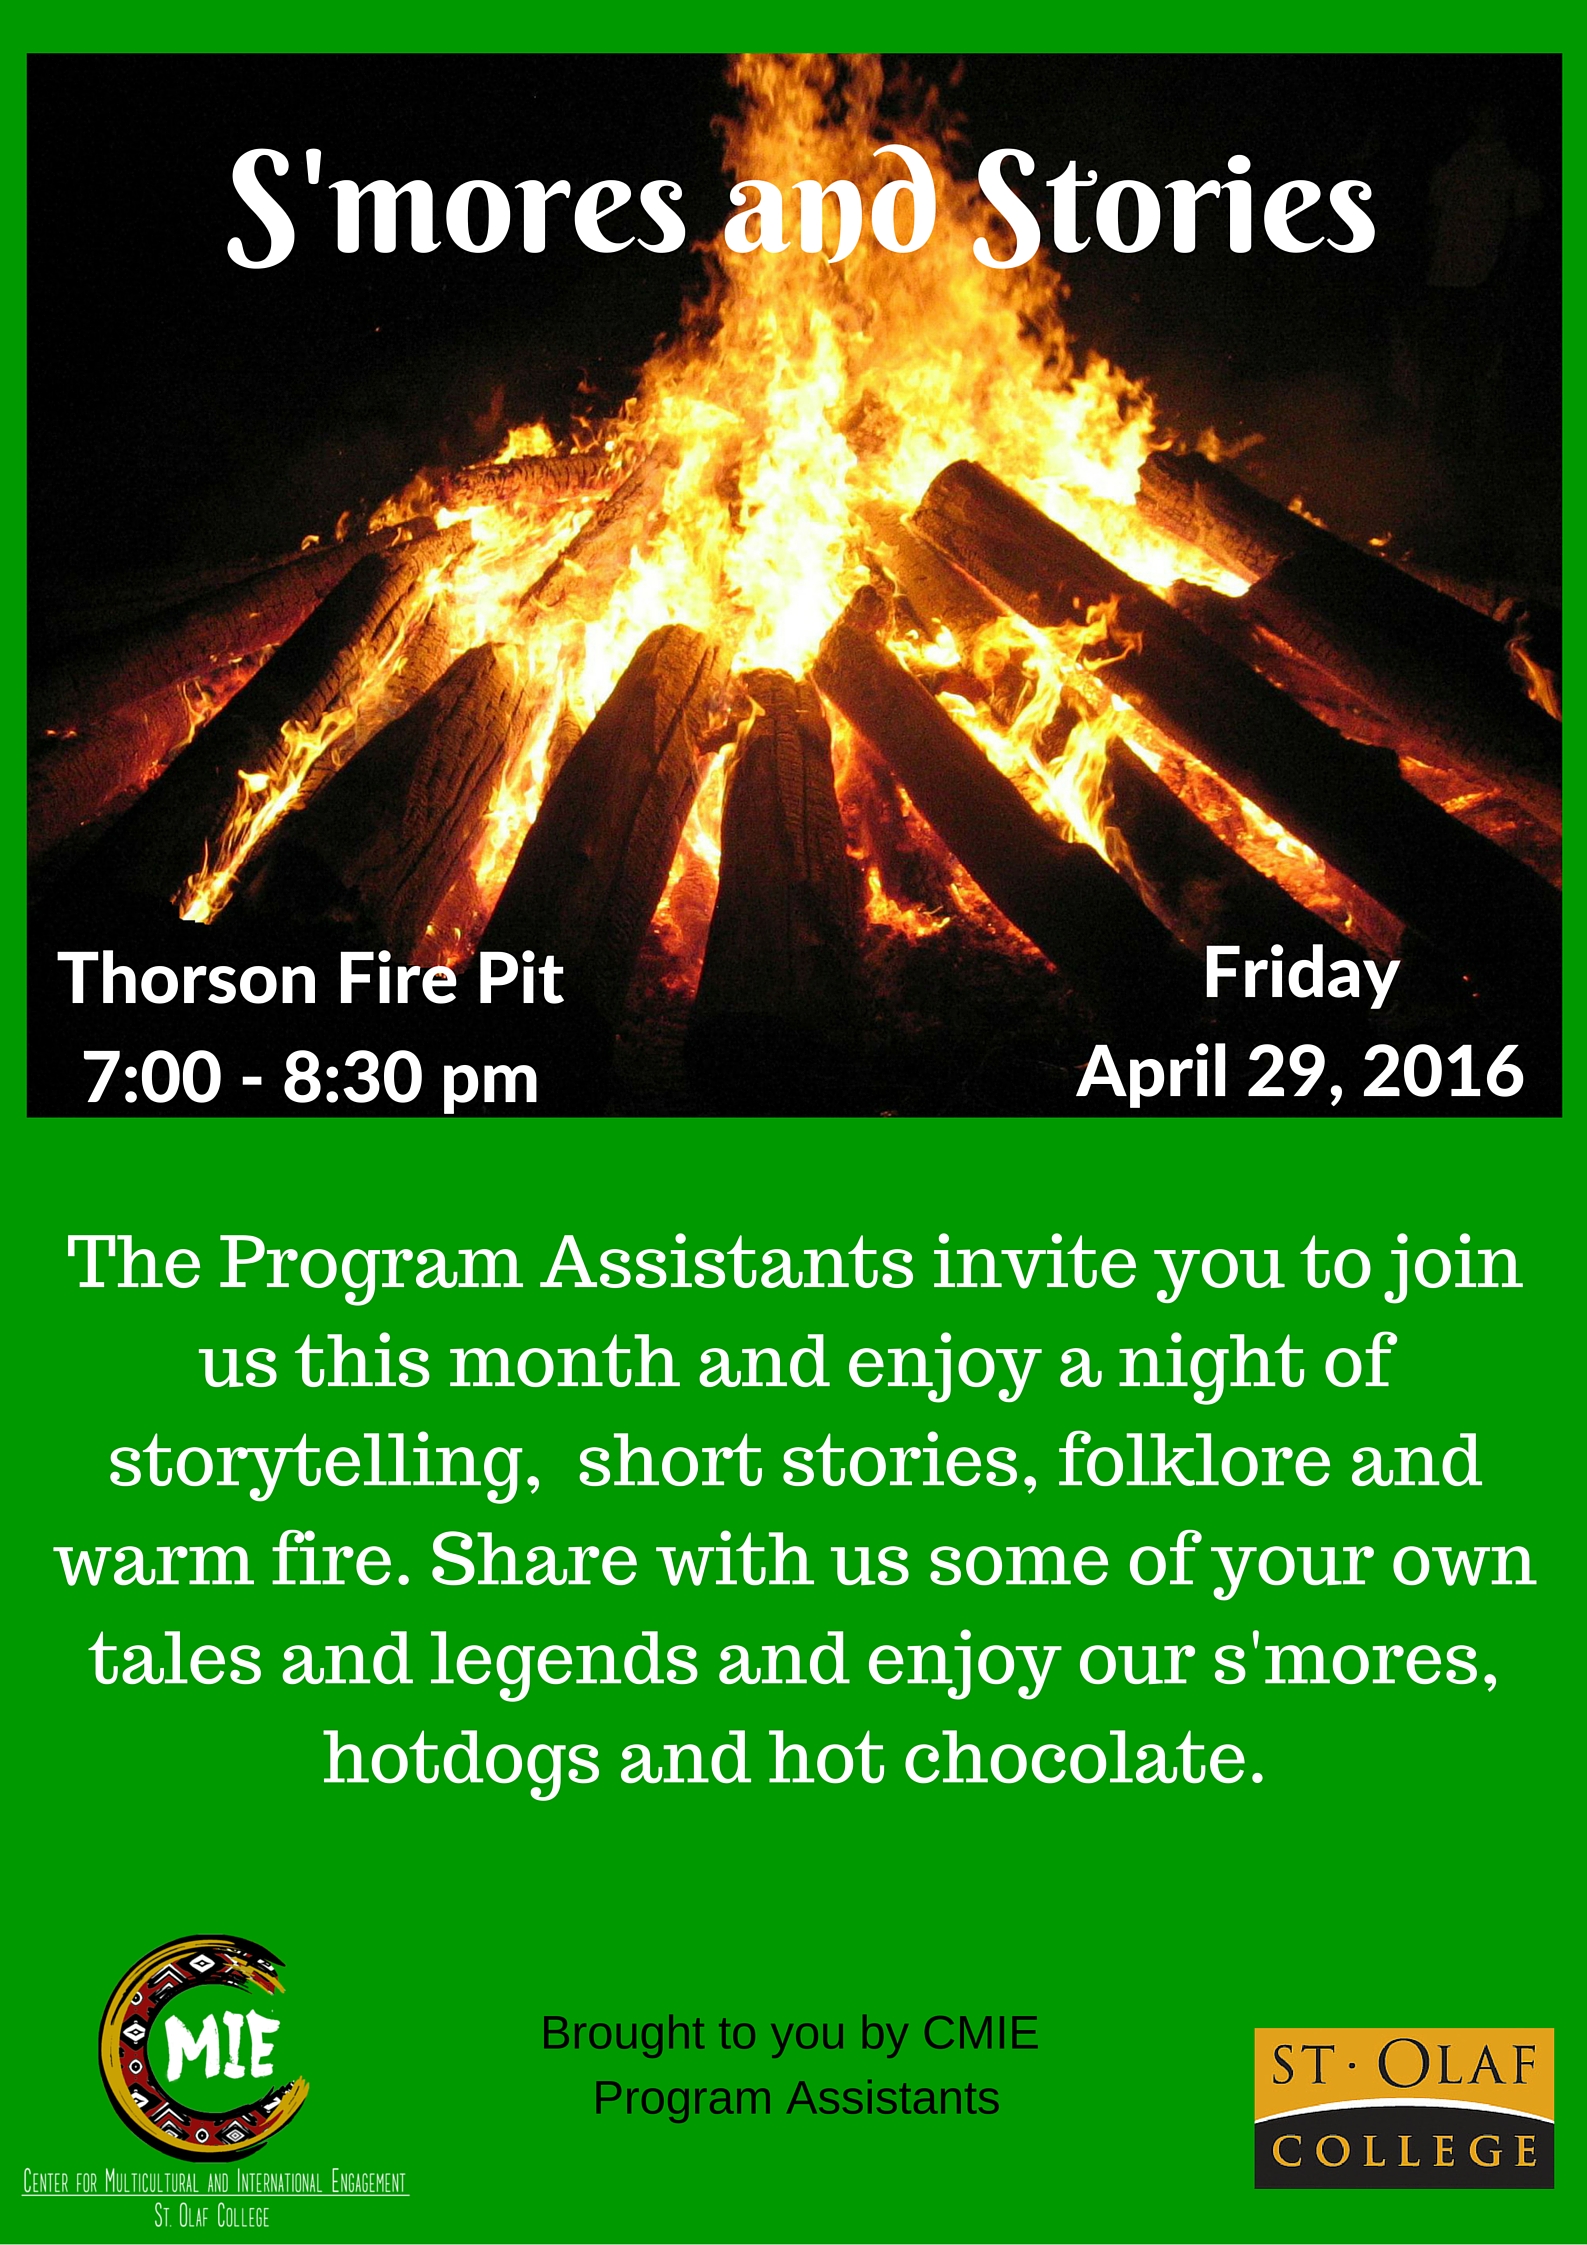 2016 PA Event S’mores and Stories.Poster. Edit6